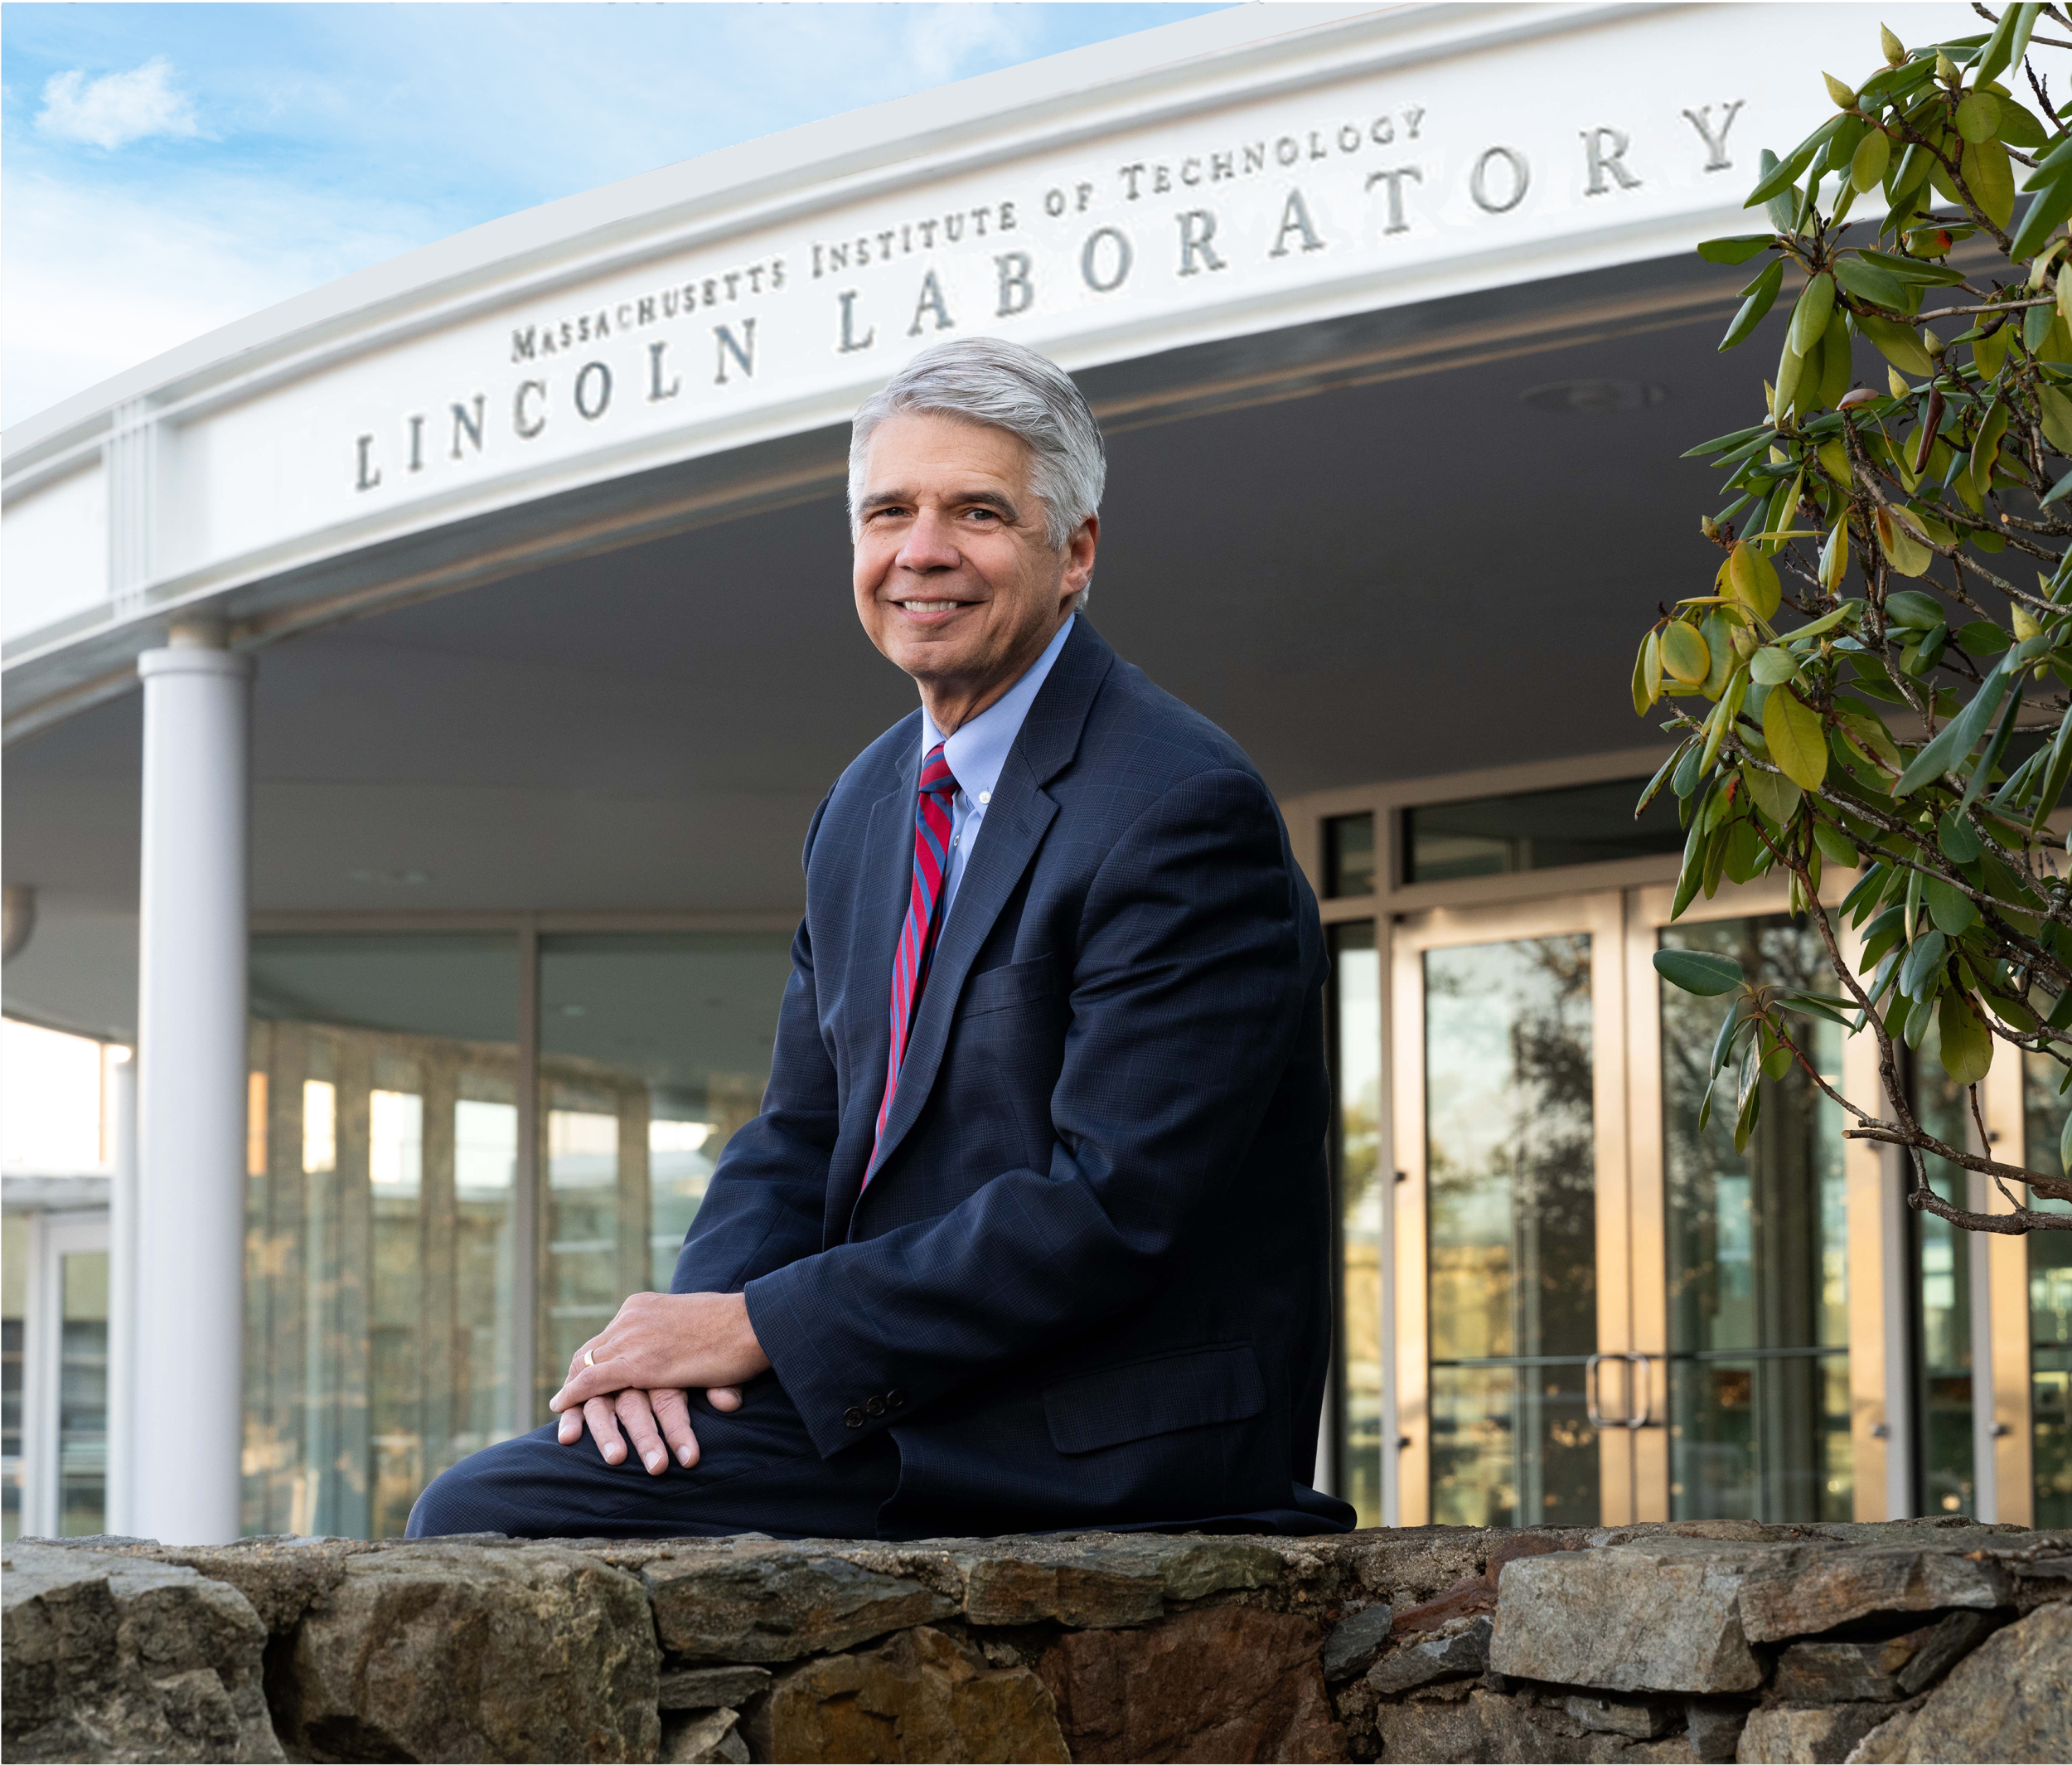 Eric Evans sits outside on a stone wall, in front of the Lincoln Laboratory's main entrance